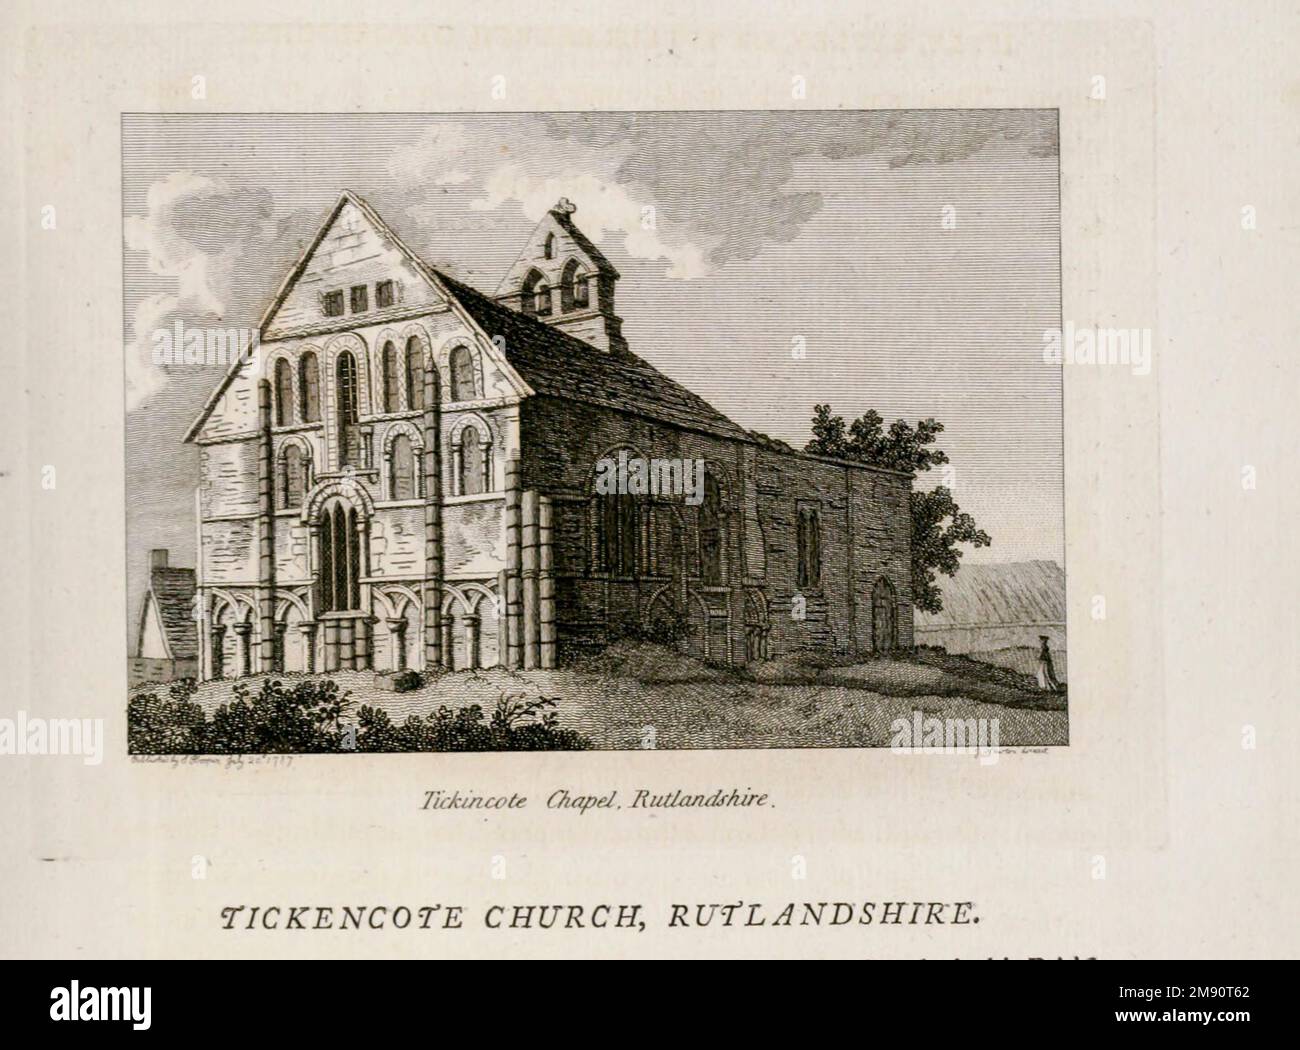 TICKENCOTE CHURCH, RUTLANDSHIRE from the book ' Supplement to the antiquities of England and Wales ' by Francis Grose, Publication date 1777 Stock Photo